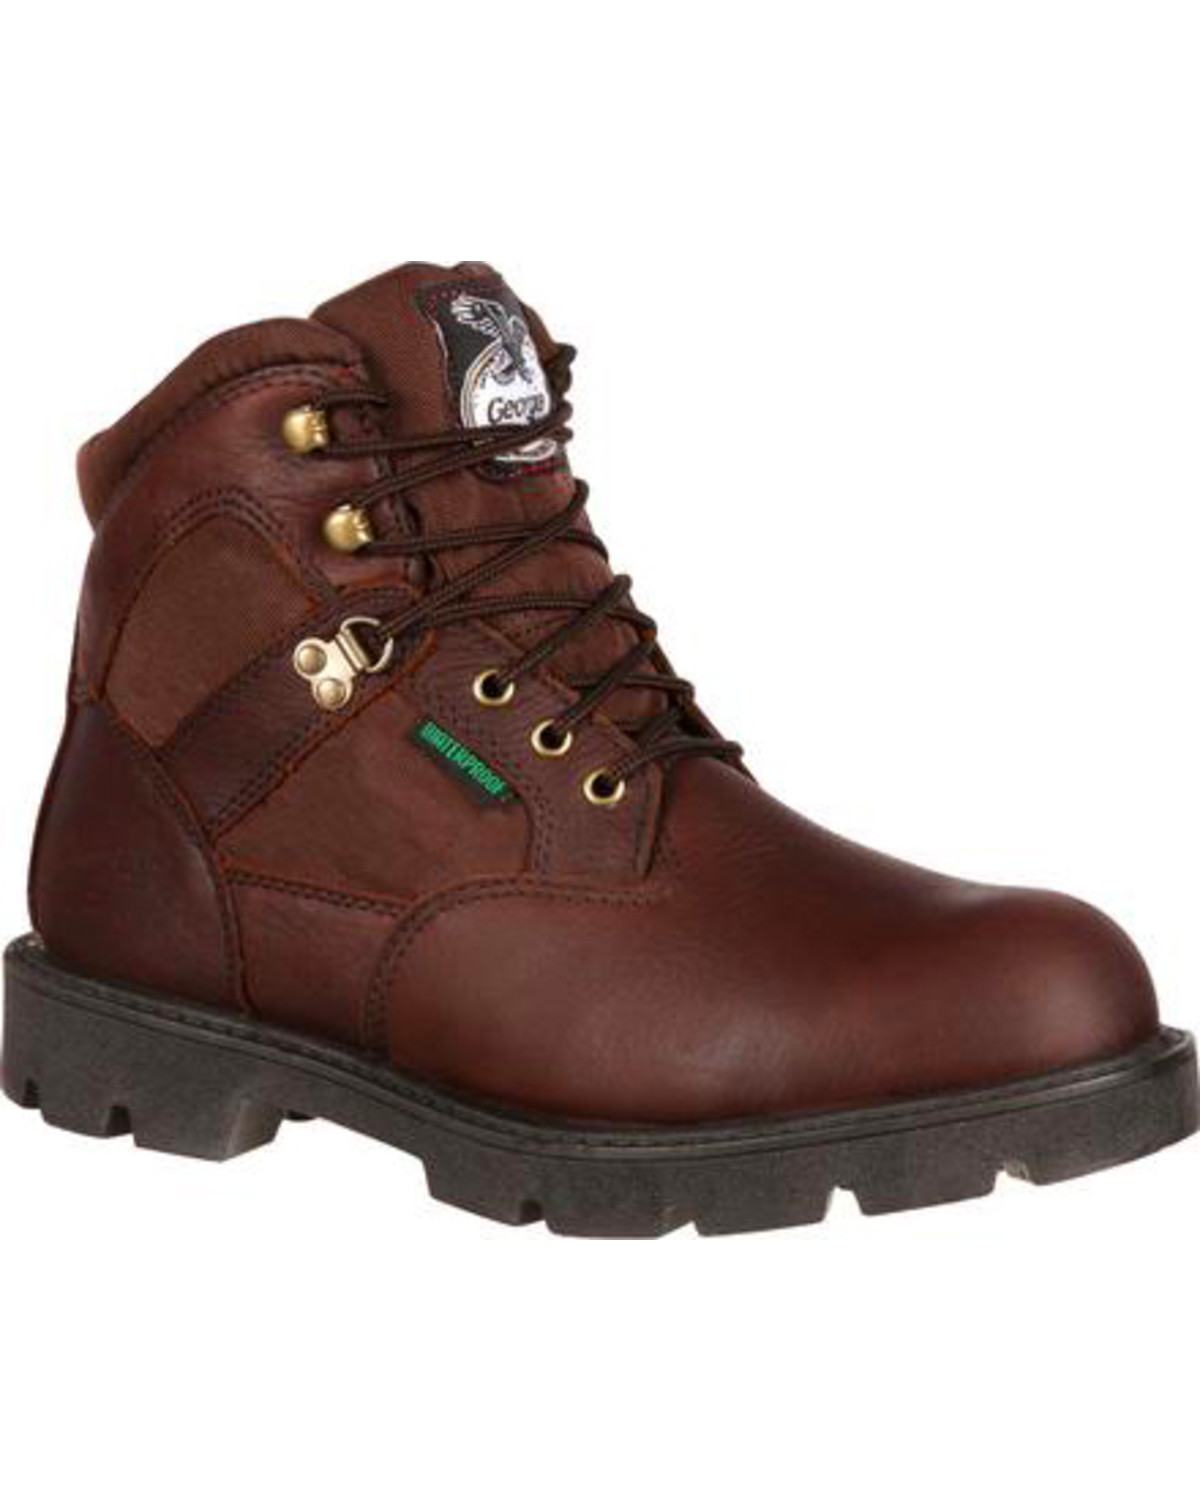 Georgia Men's 6" Lace Up Work Boots